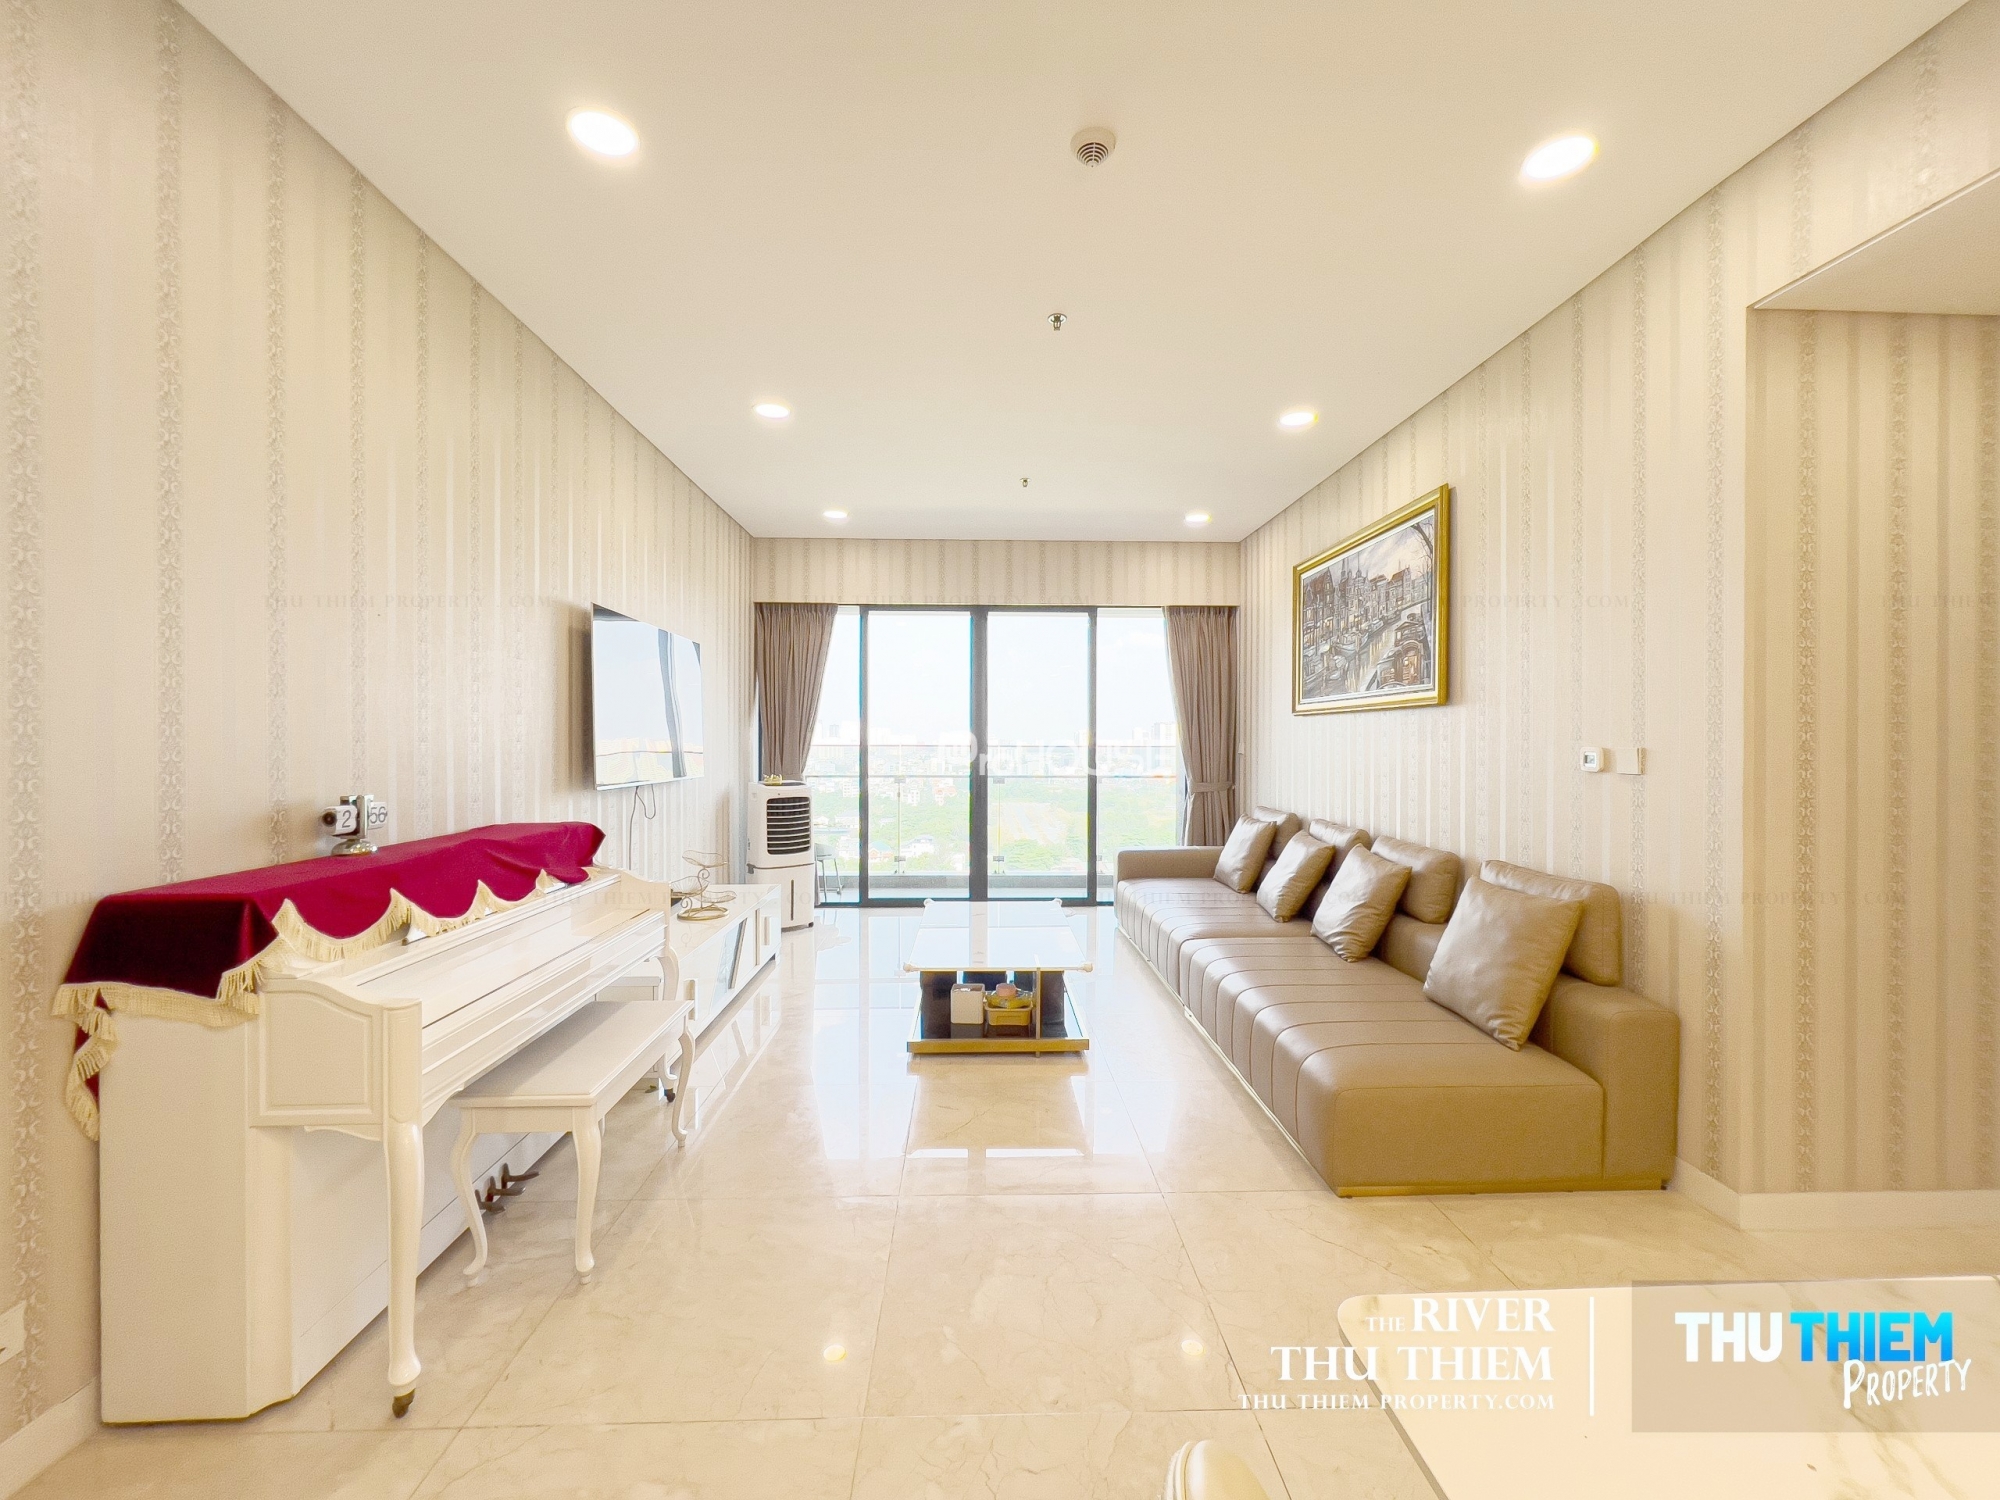 Super luxurious The River Thu Thiem apartment for sale with high-class furniture and unobstructed view